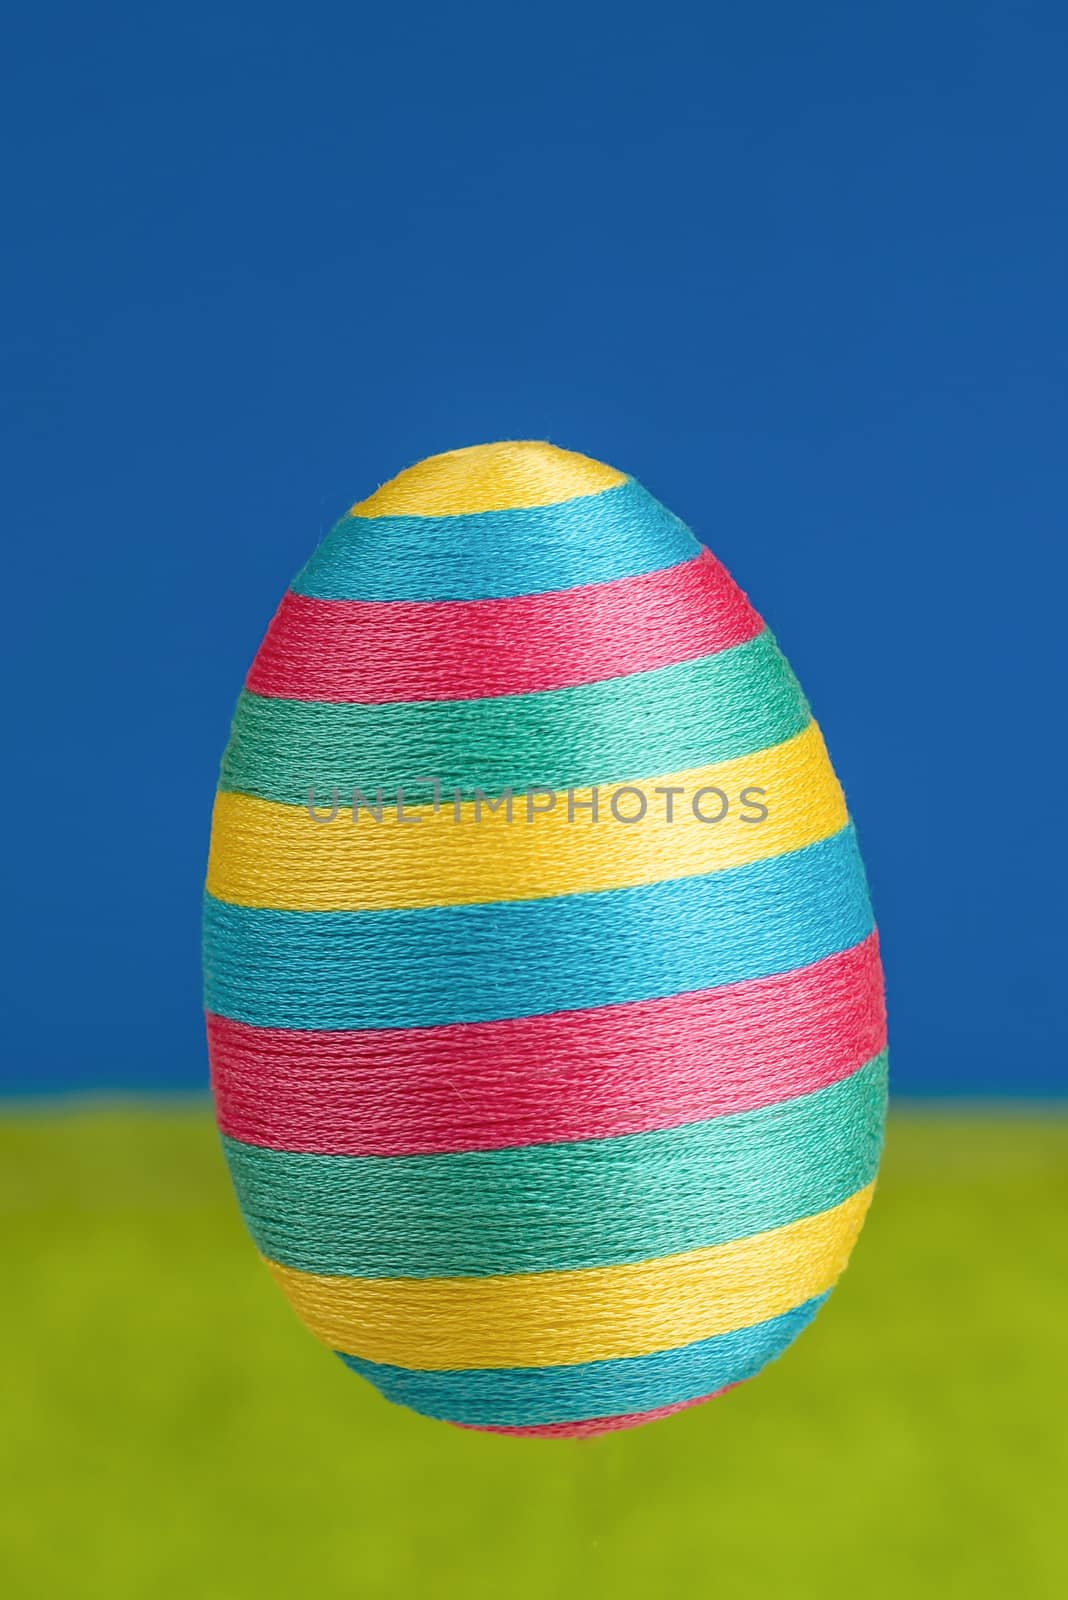 Photo presents big striped rainbow coloured easter egg on green and blue background, space for text provided.